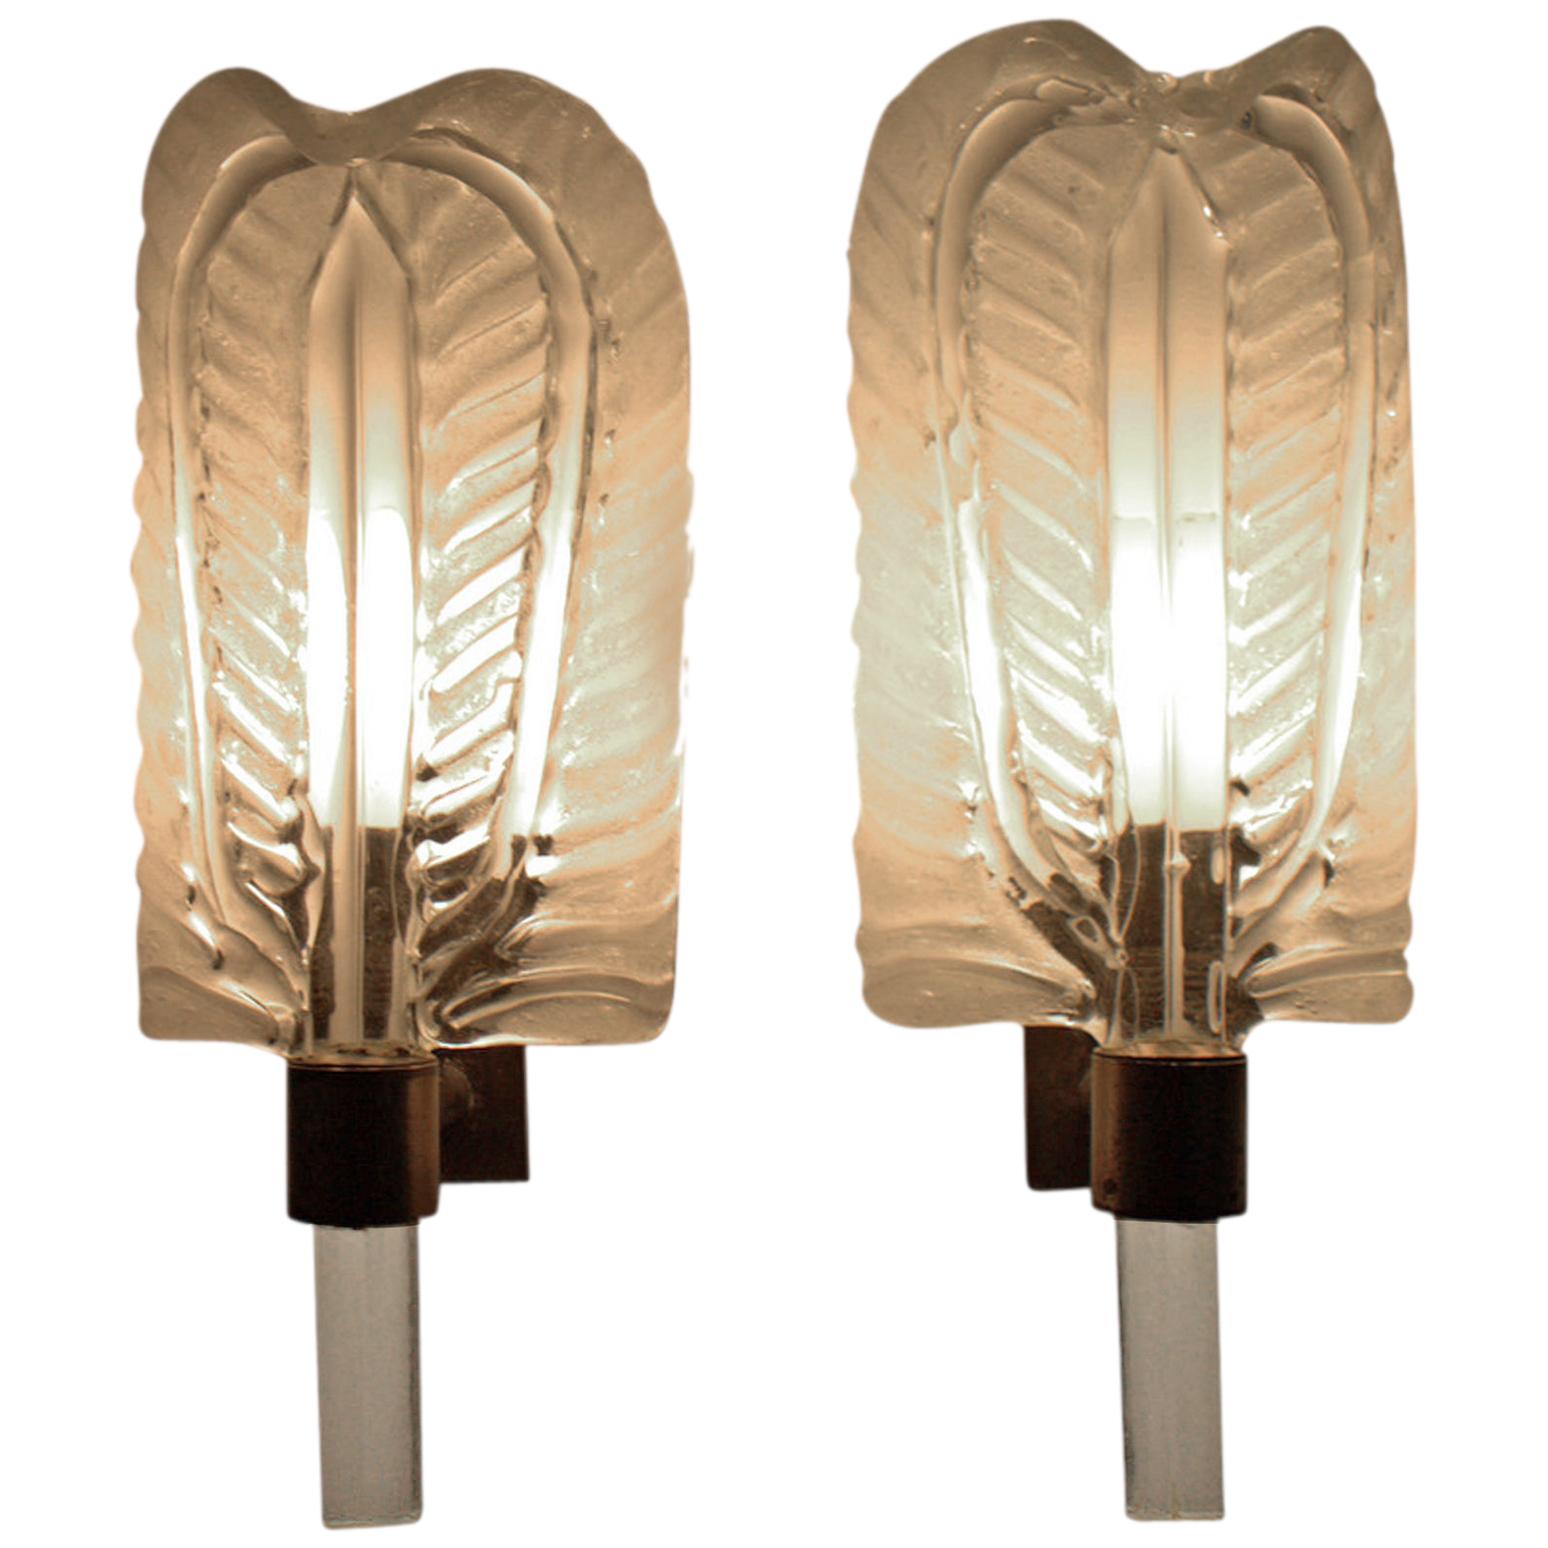 Pair of Brass and Glass Wall Sconces by Barovier Toso, 1950s